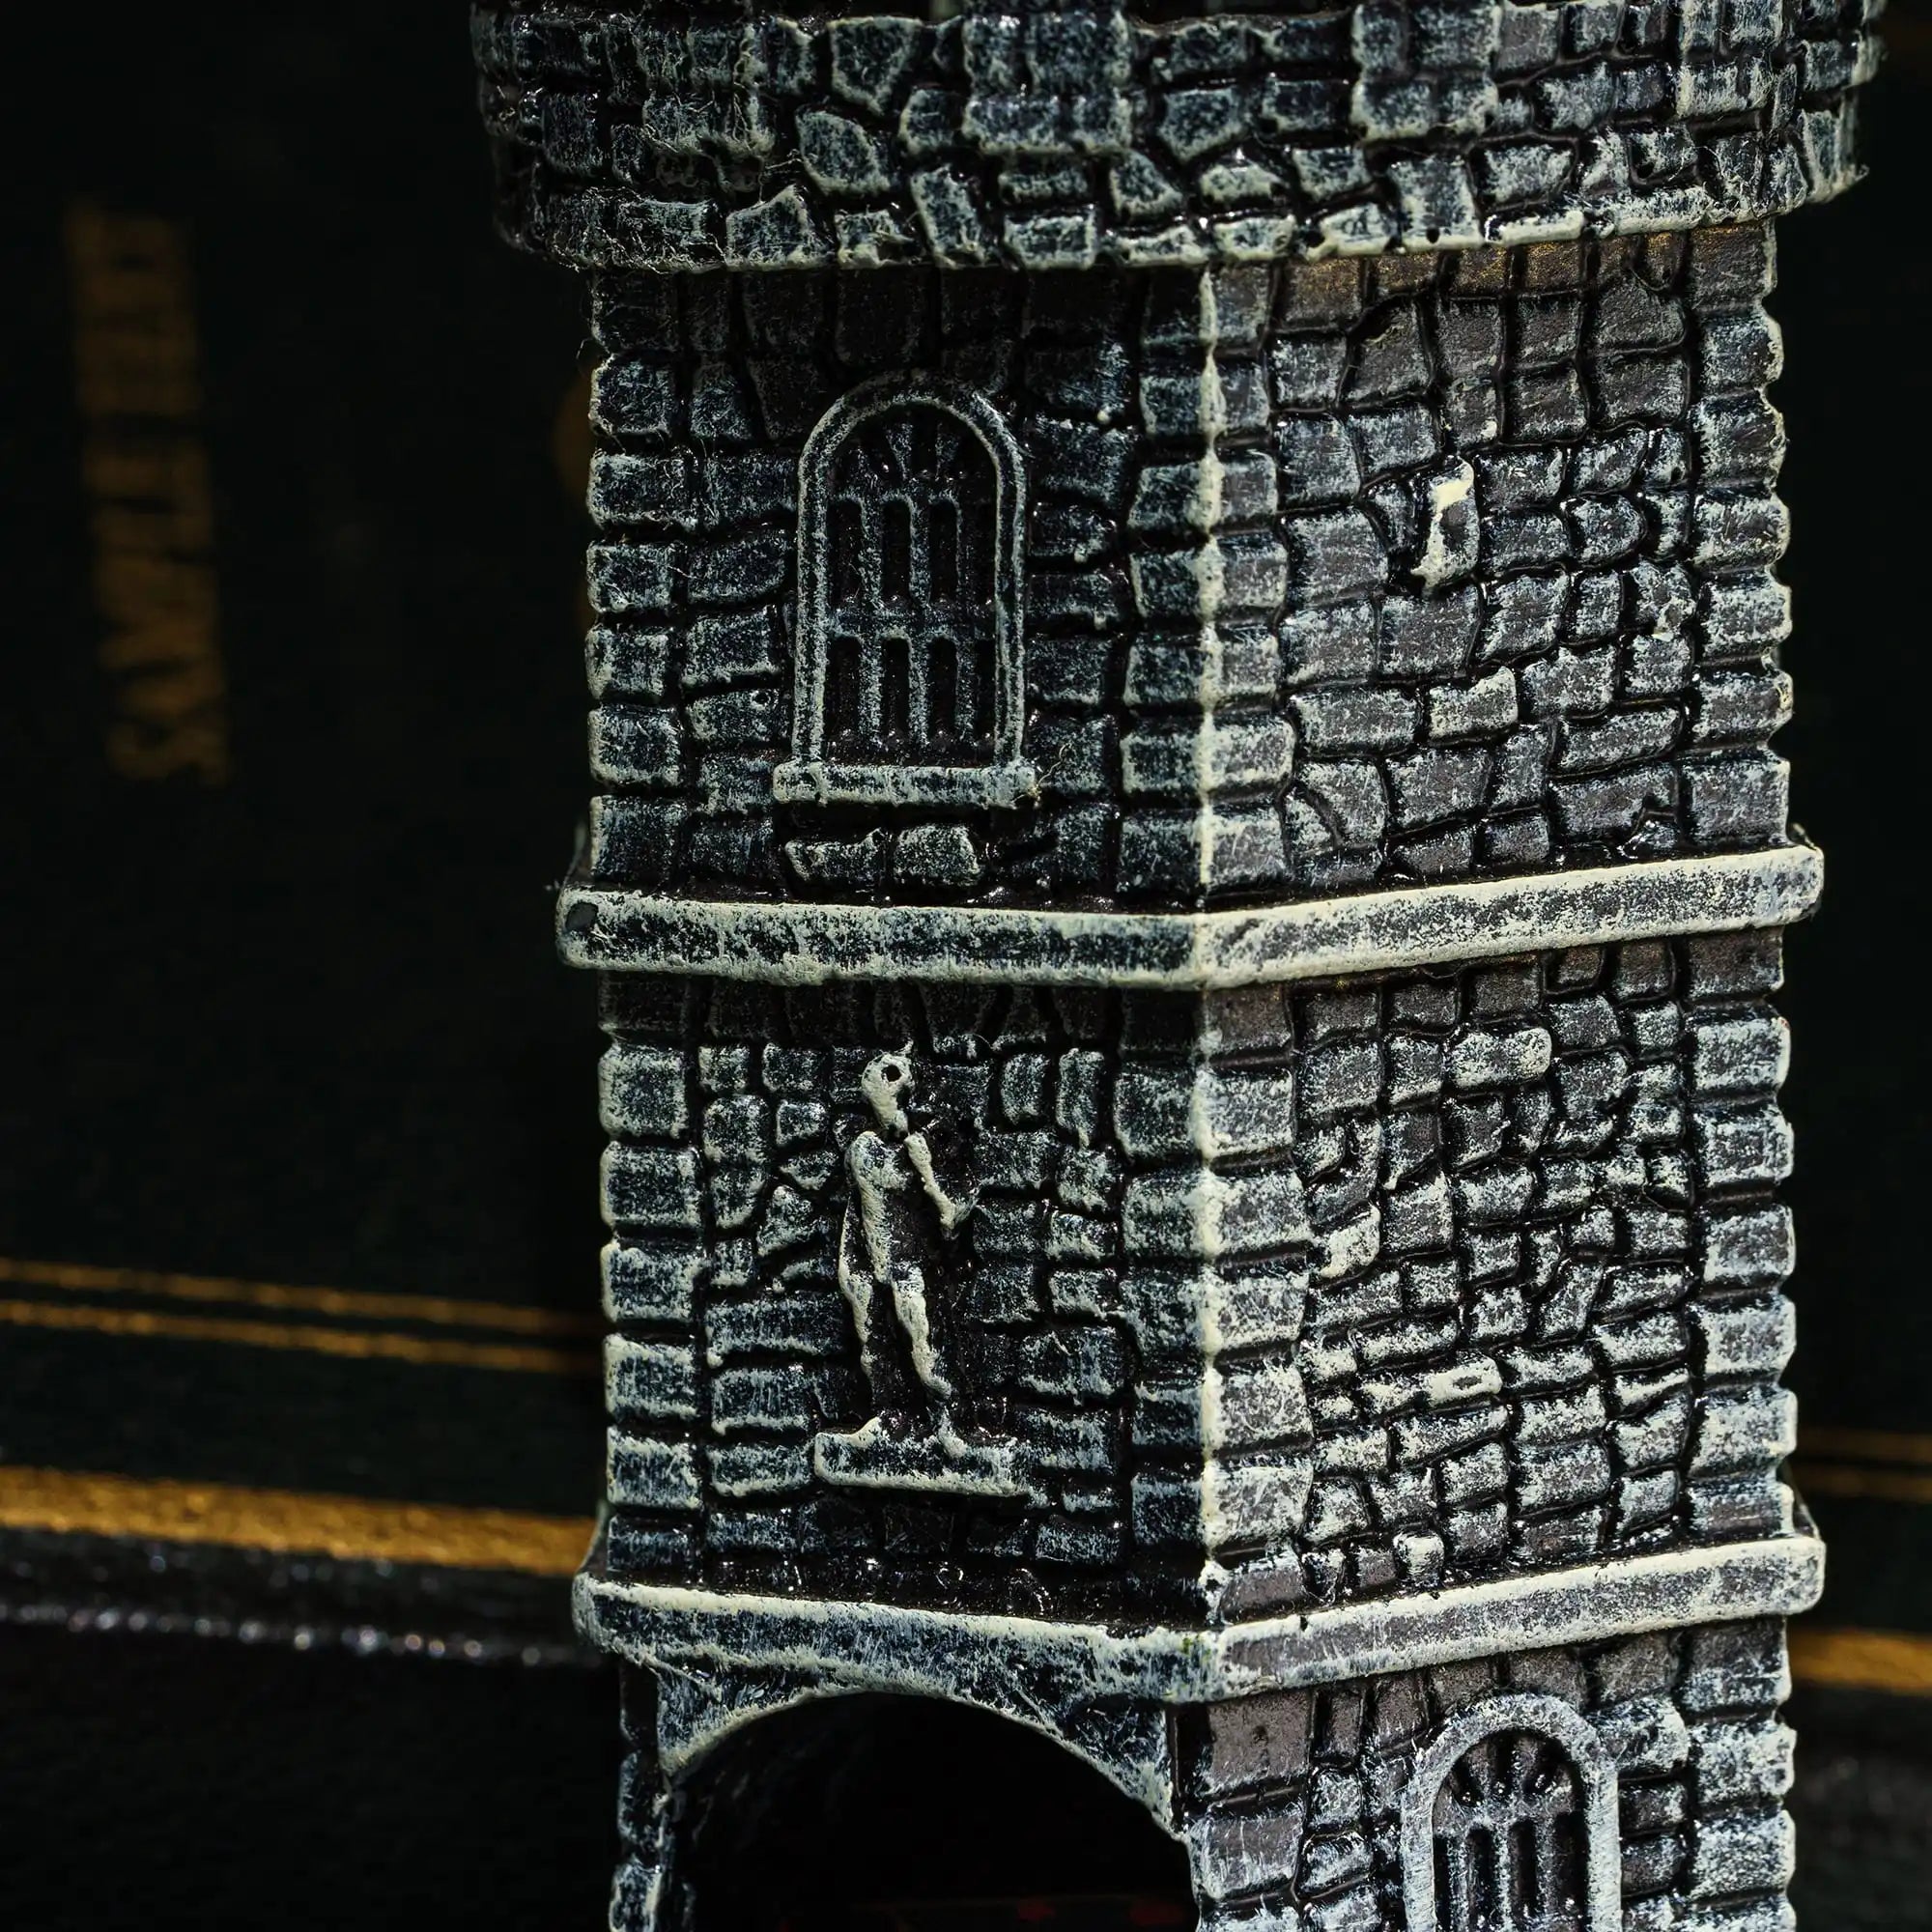 The Watchtower Dice Tower